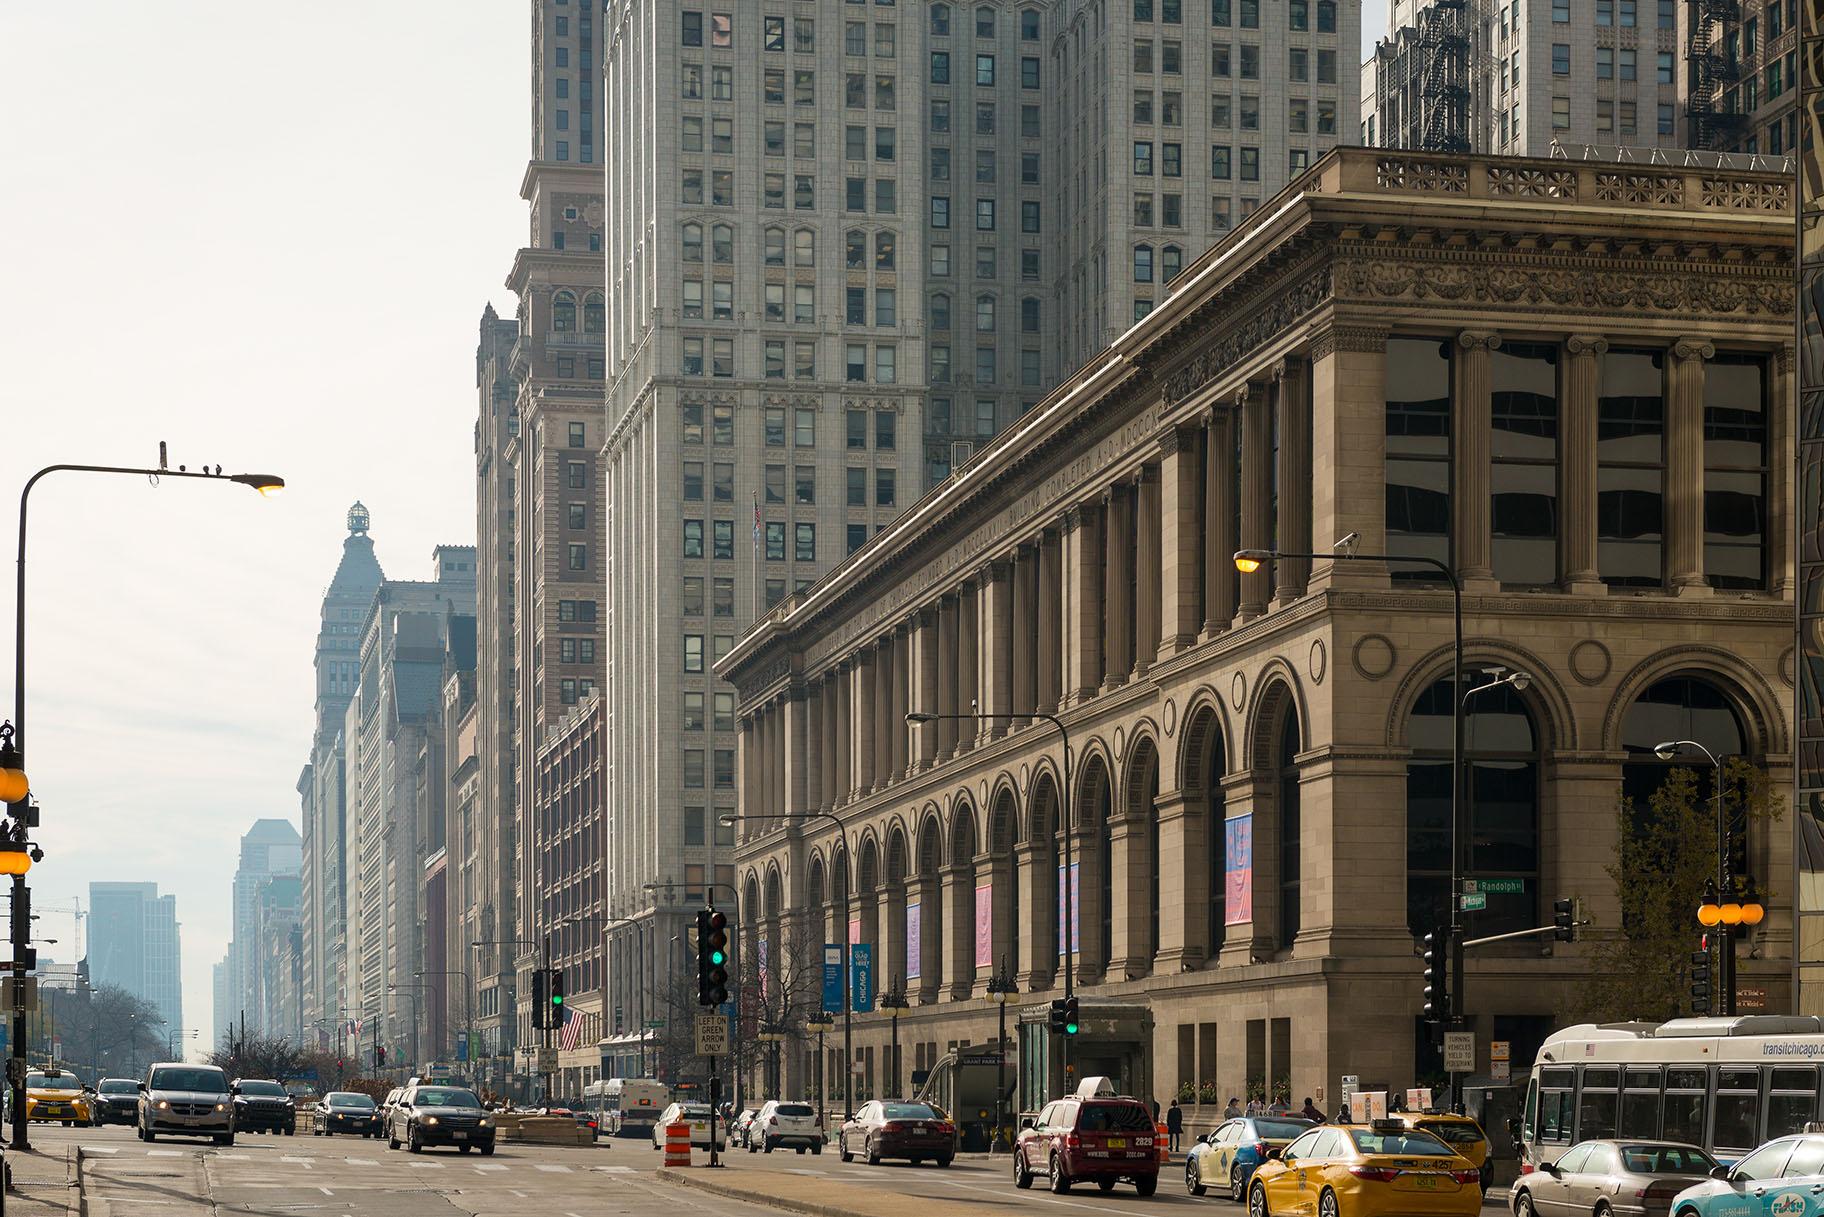 The Chicago Cultural Center (Courtesy of the City of Chicago)